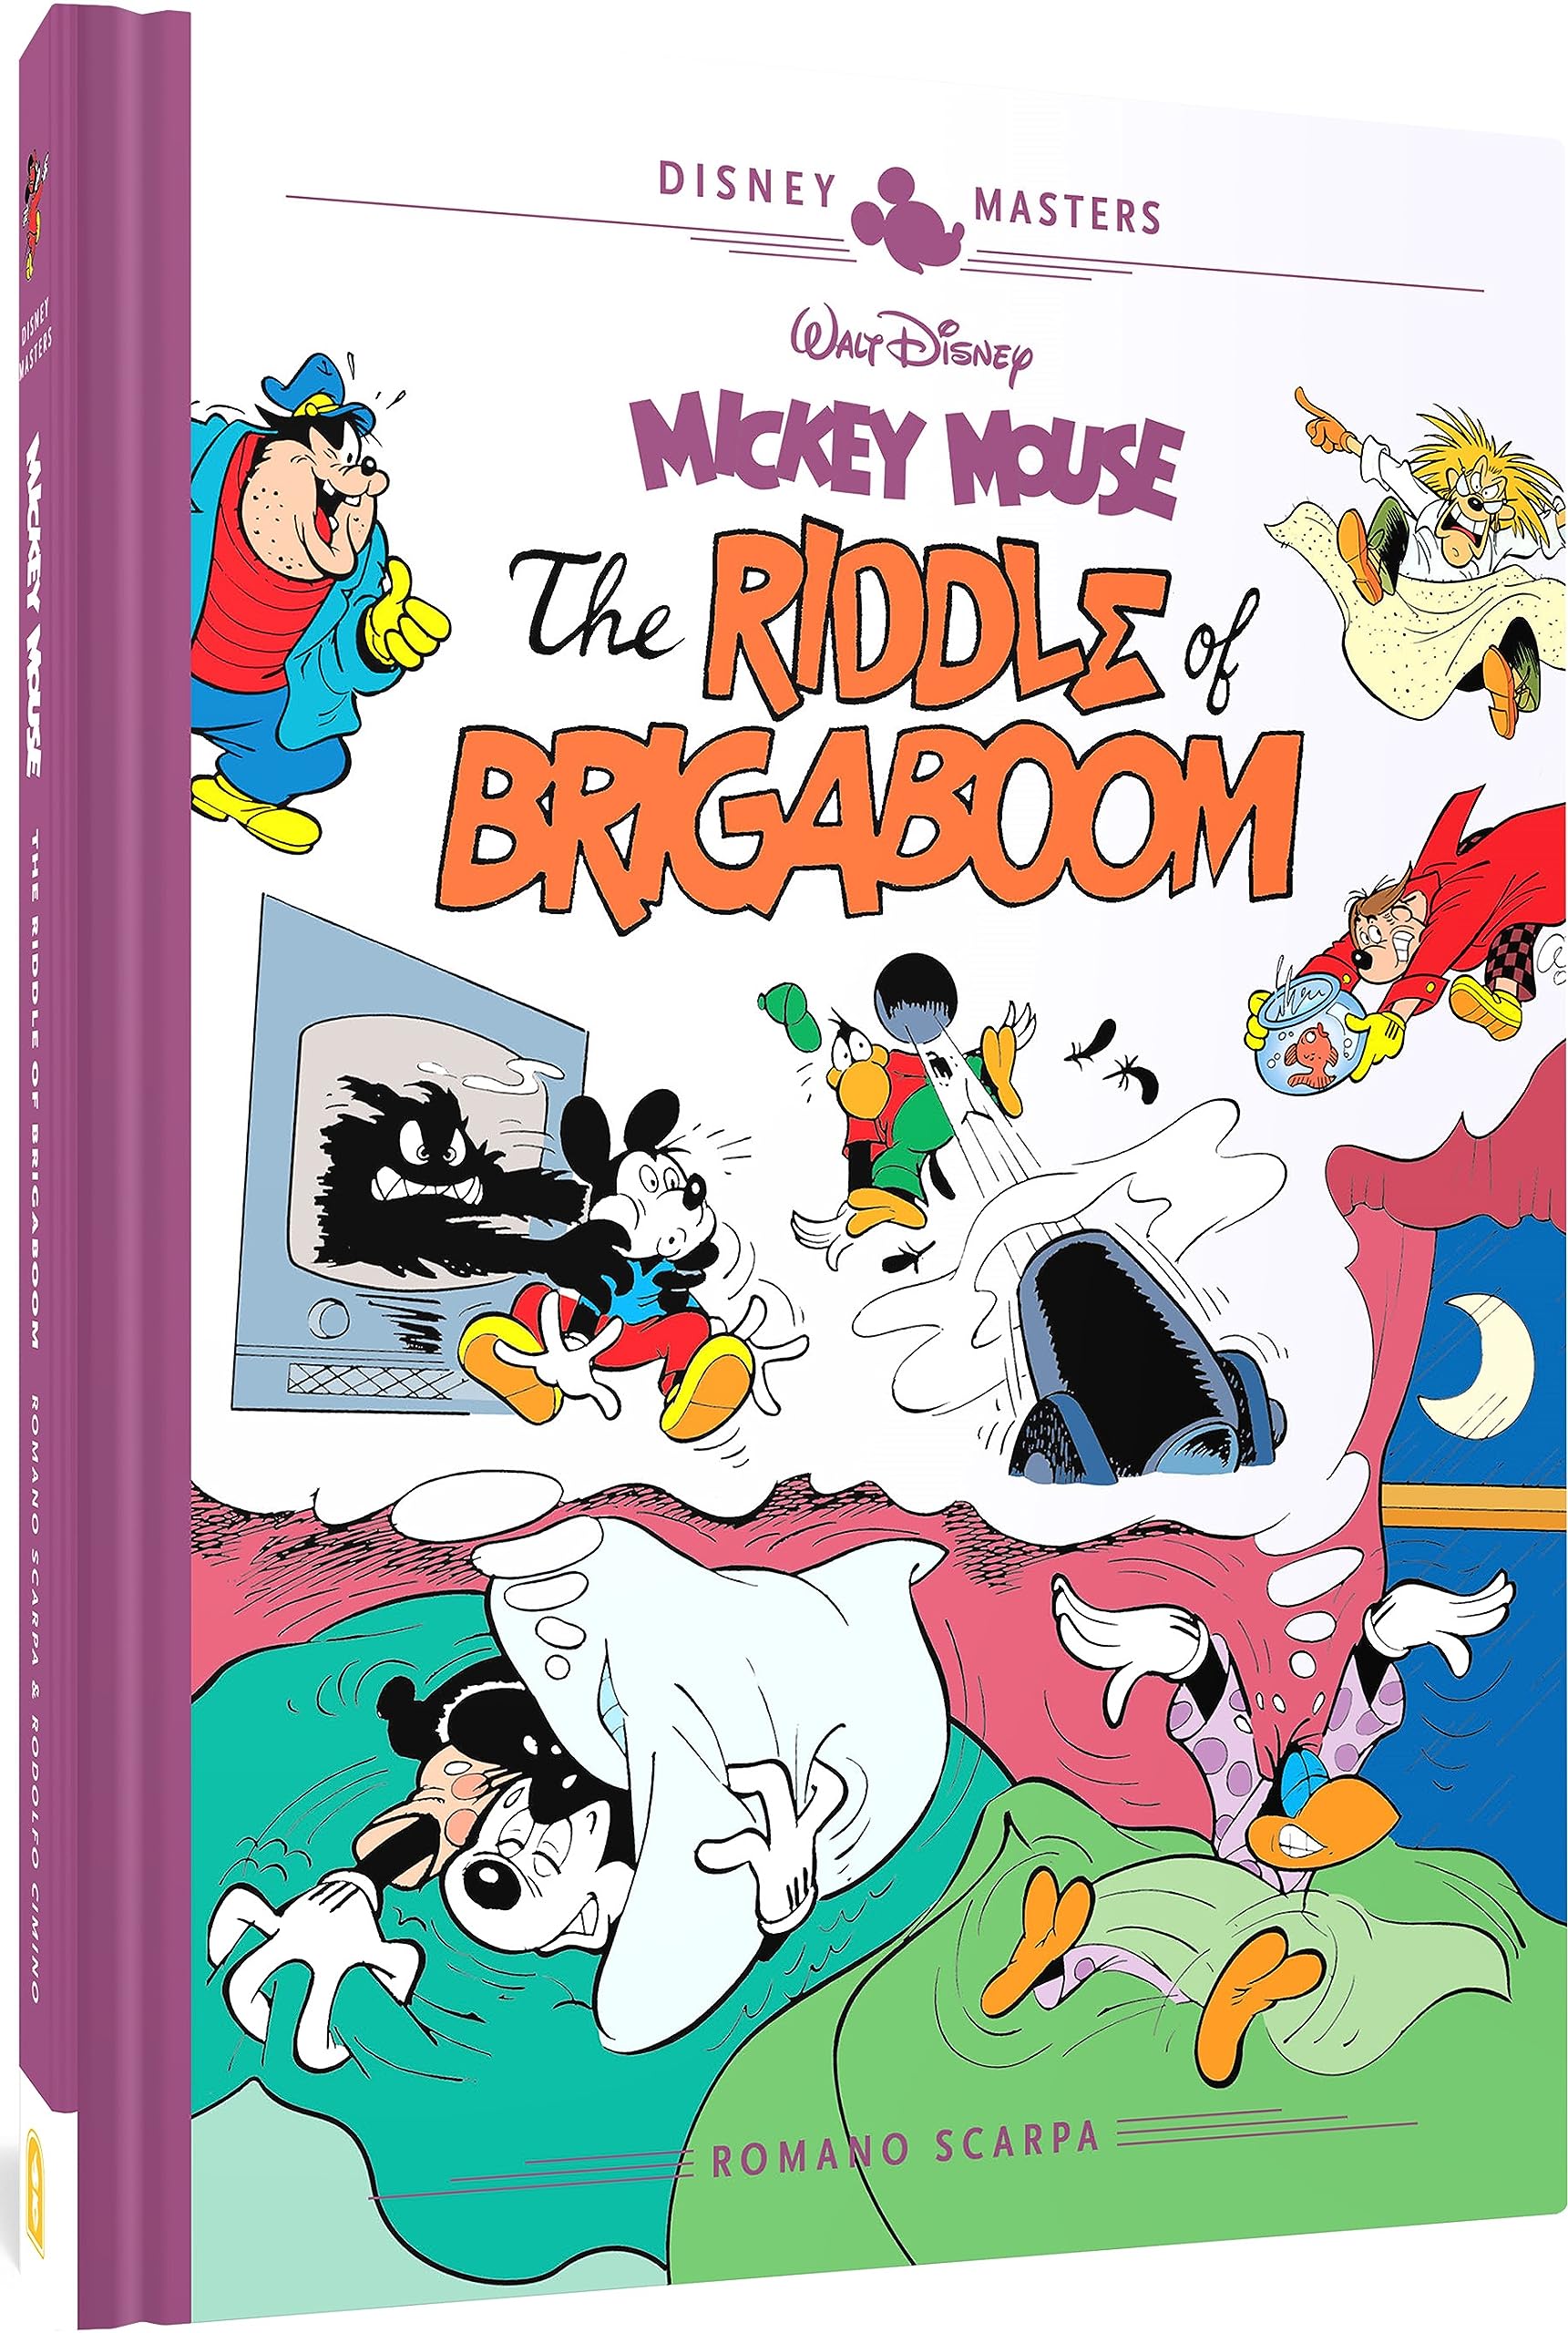 Walt Disney's Mickey Mouse: The Riddle of Brigaboom: Disney Masters Vol. 23 (The Disney Masters Collection)